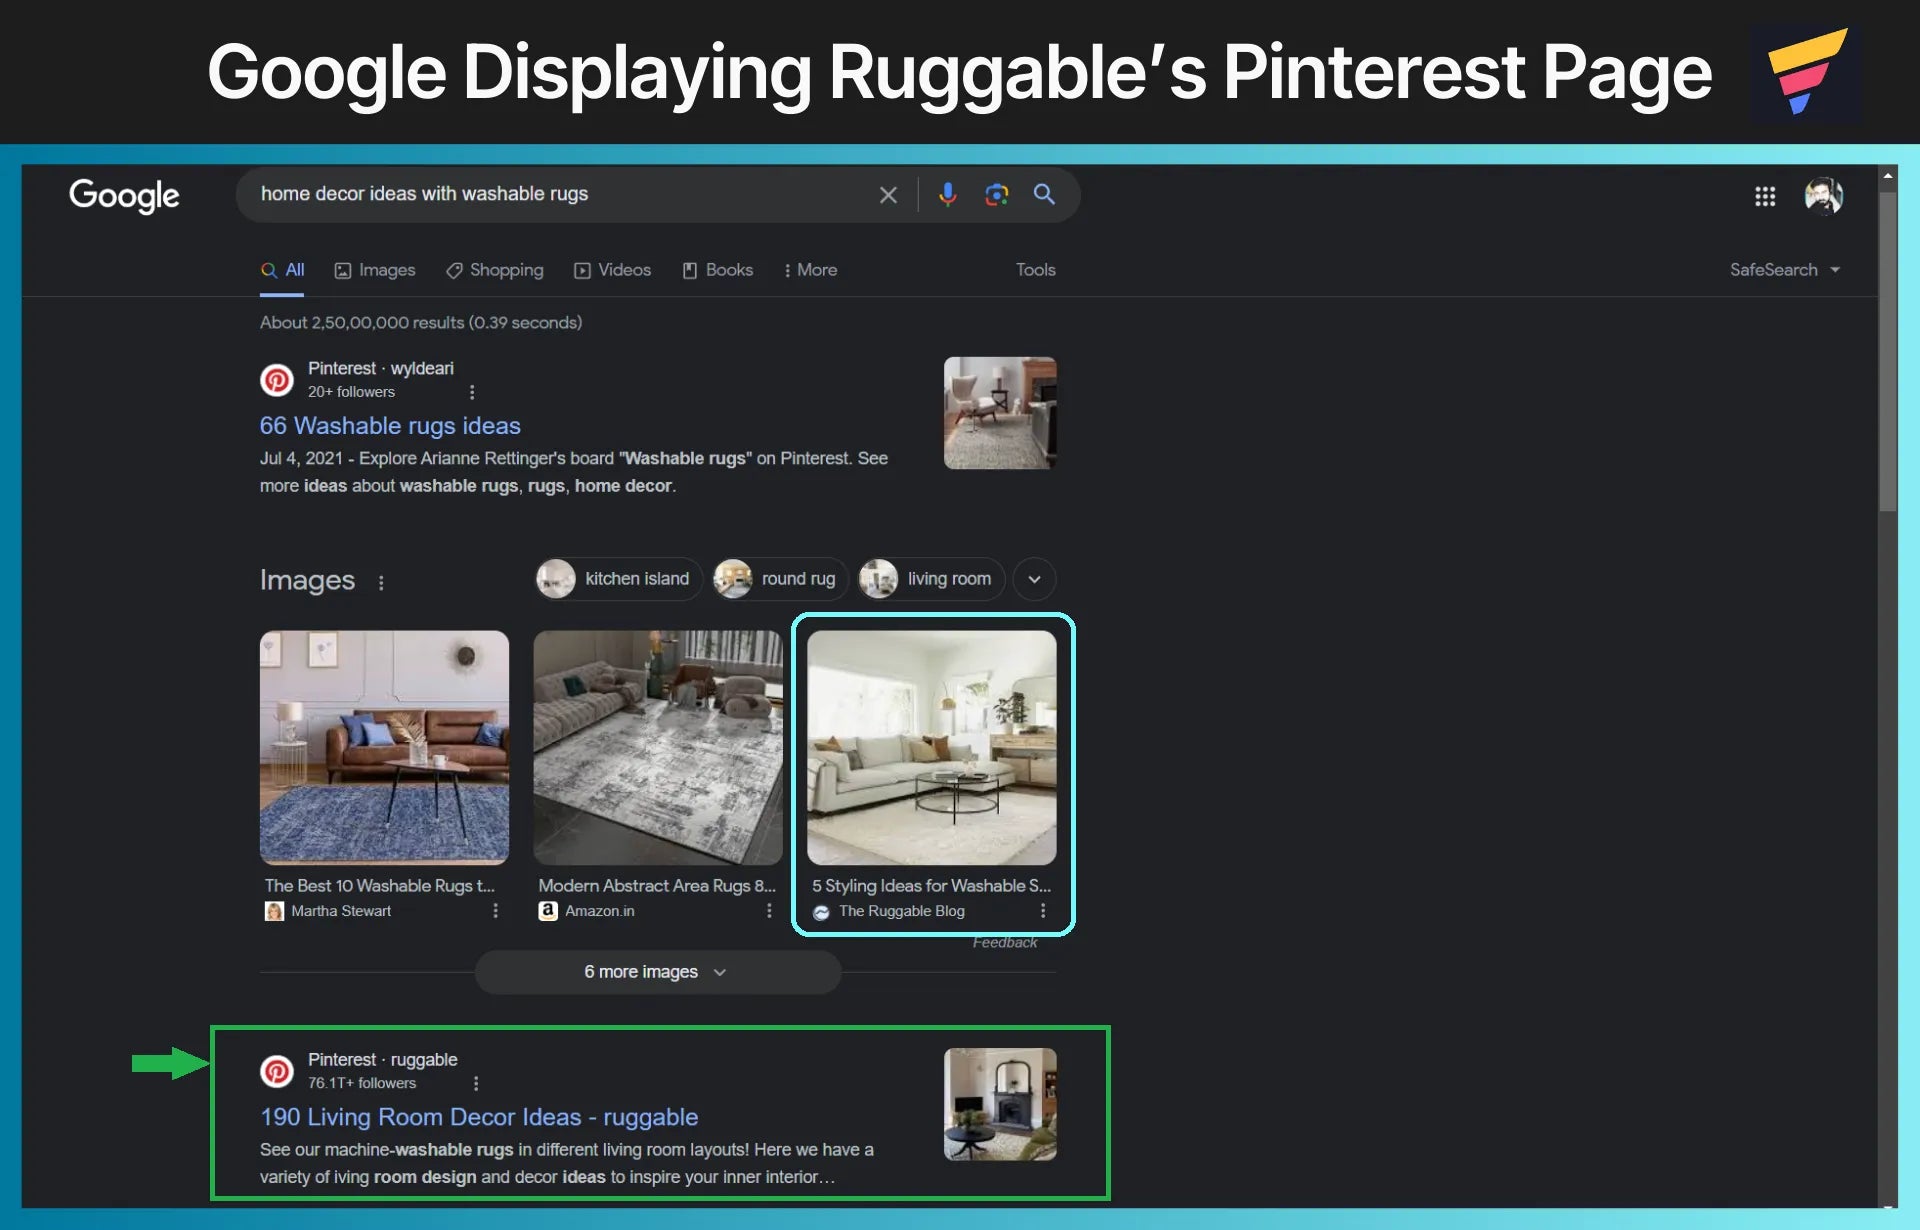 Google Displaying Ruggable’s Pinterest Page